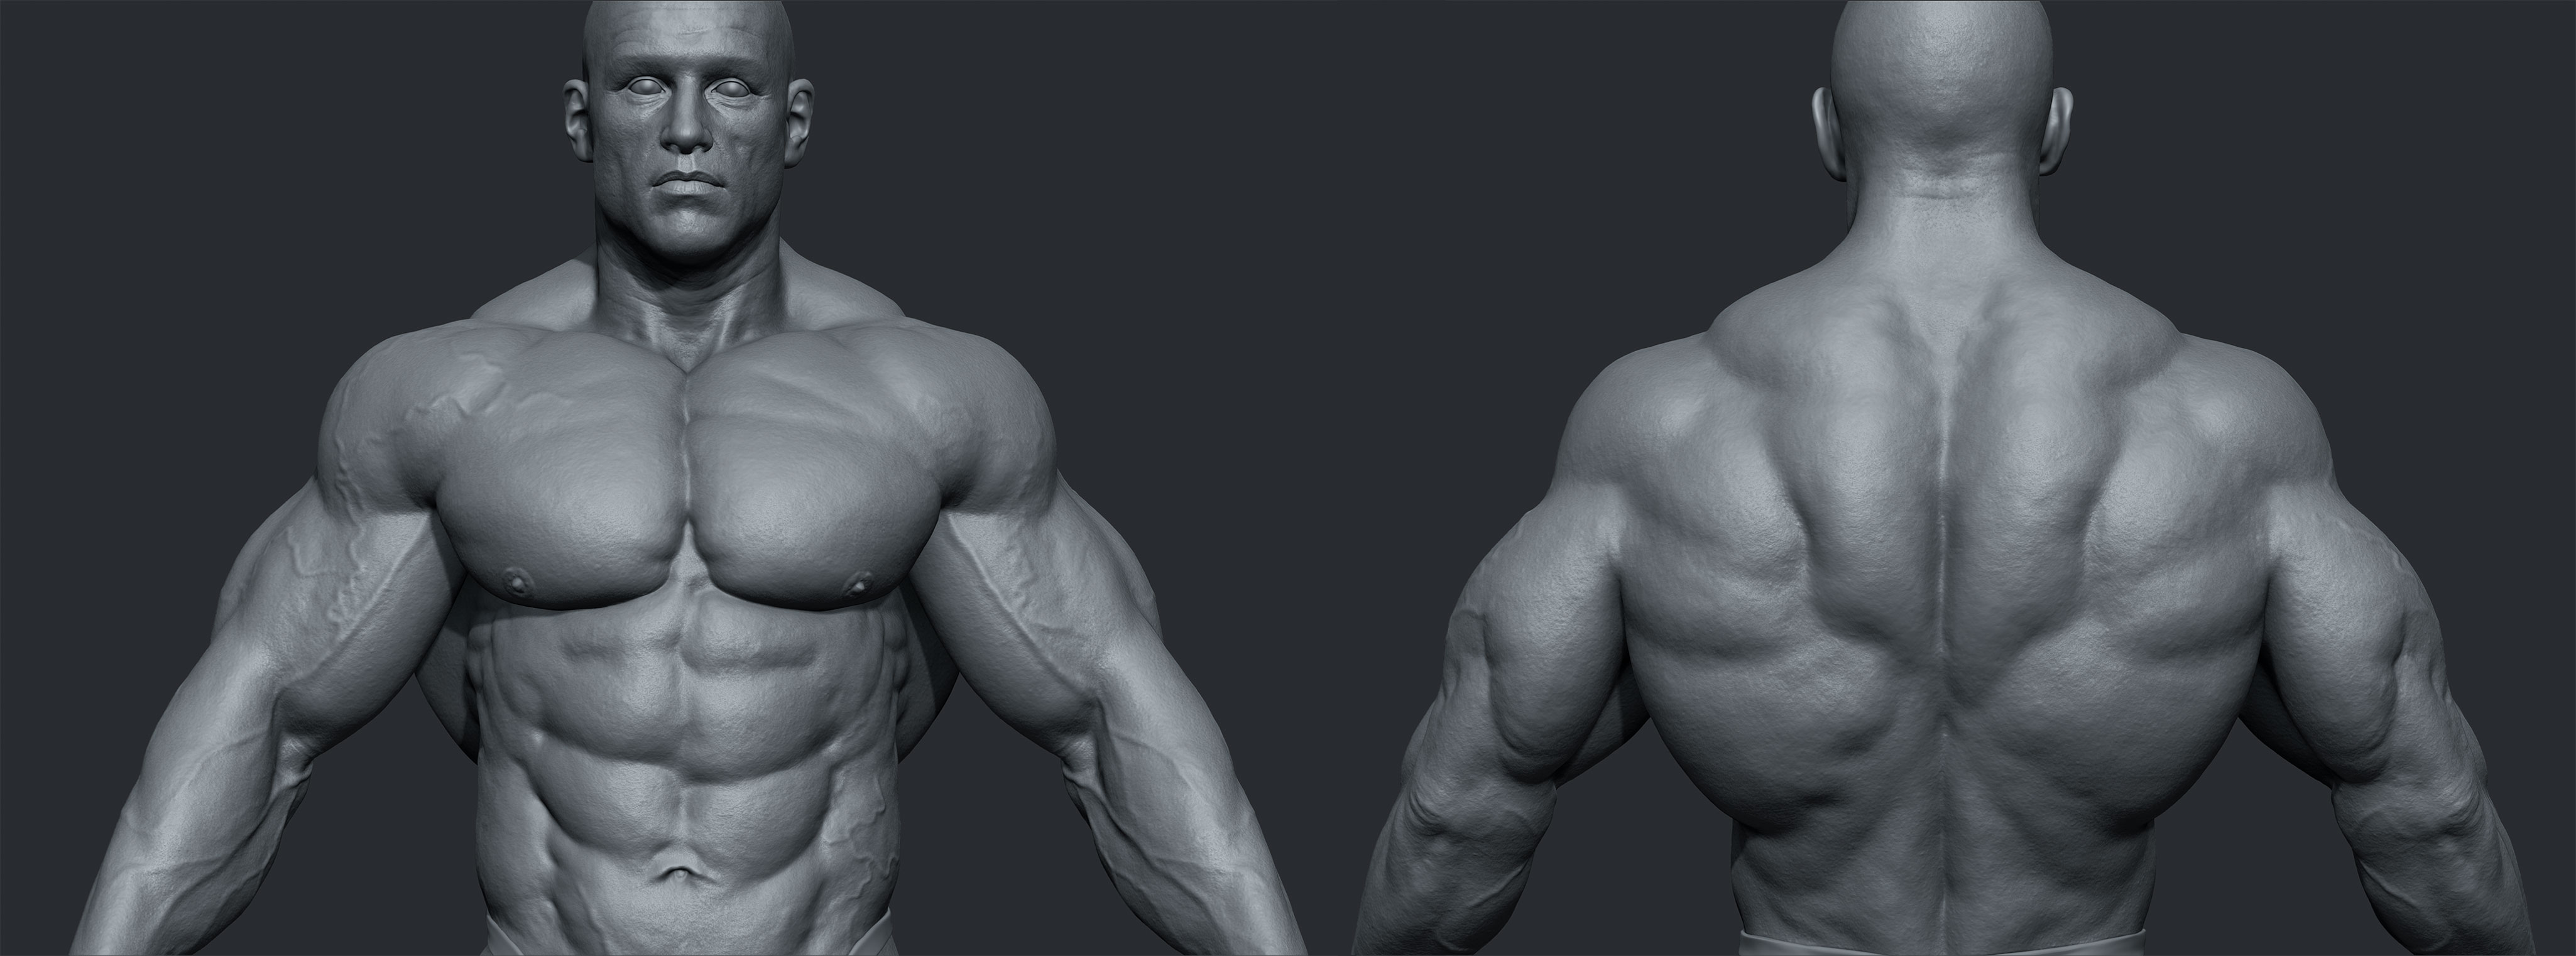 Zbrush male body solidworks apisdk.exe download